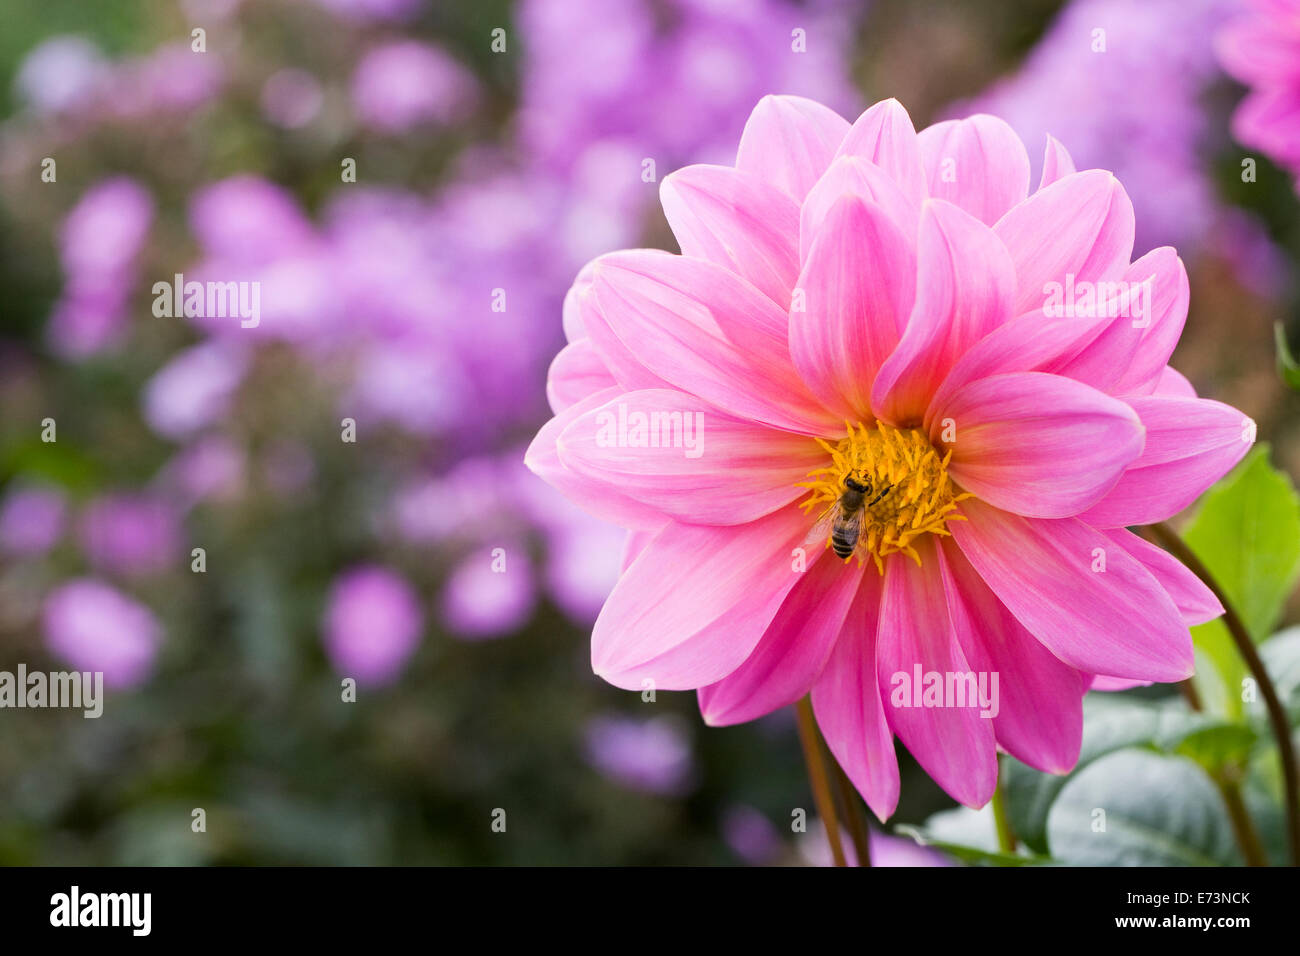 Honeybee on a Pink Dahlia growing in an herbaceous border. Stock Photo